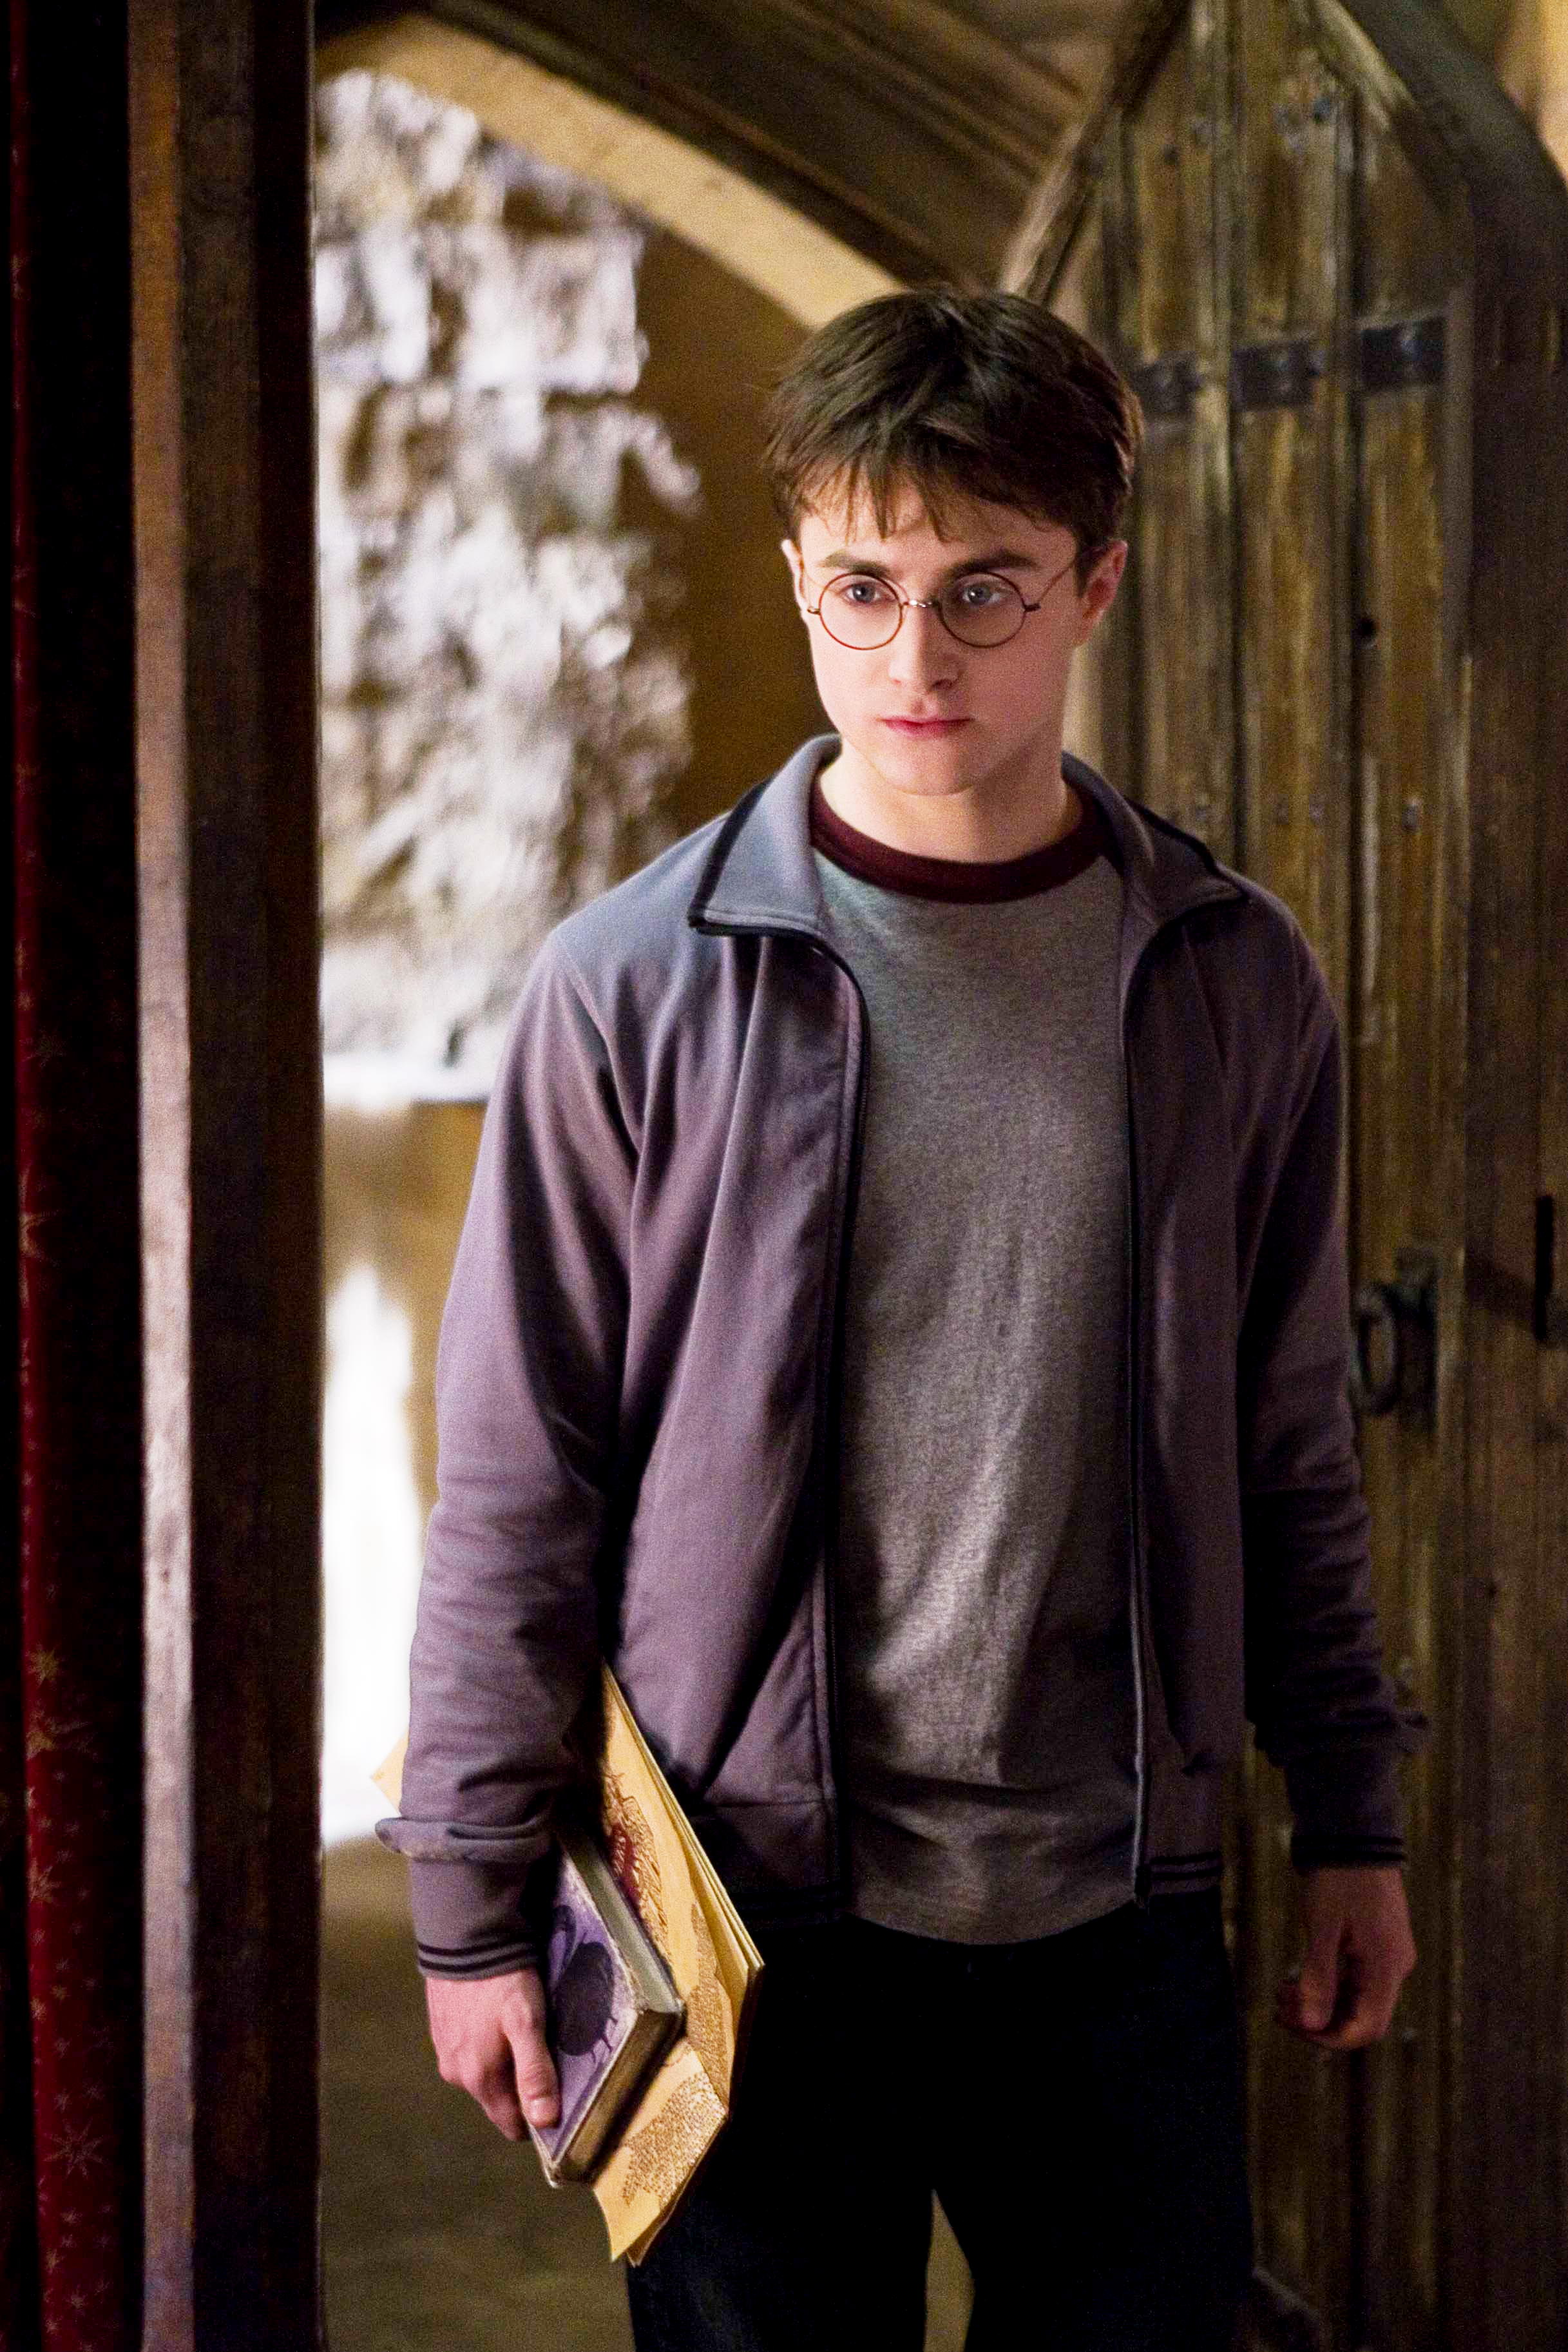 Daniel Radcliffe as Harry Potter in Warner Bros' Harry Potter and the Half-Blood Prince (2009)